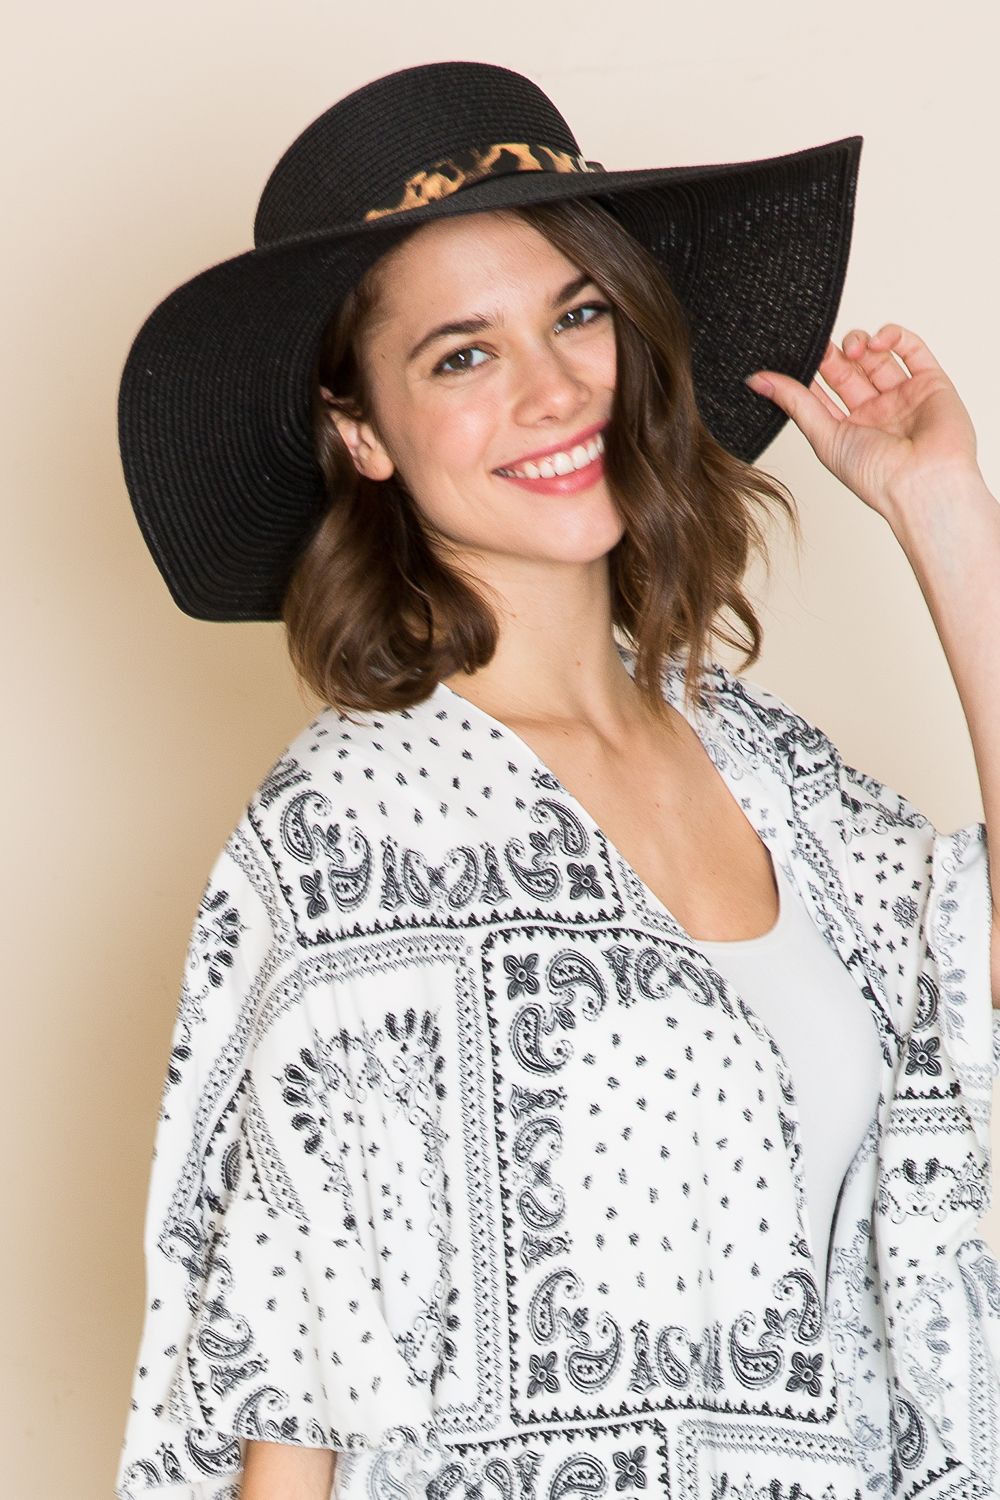 Justin Taylor Printed Belt Sunhat in Black - Guy Christopher